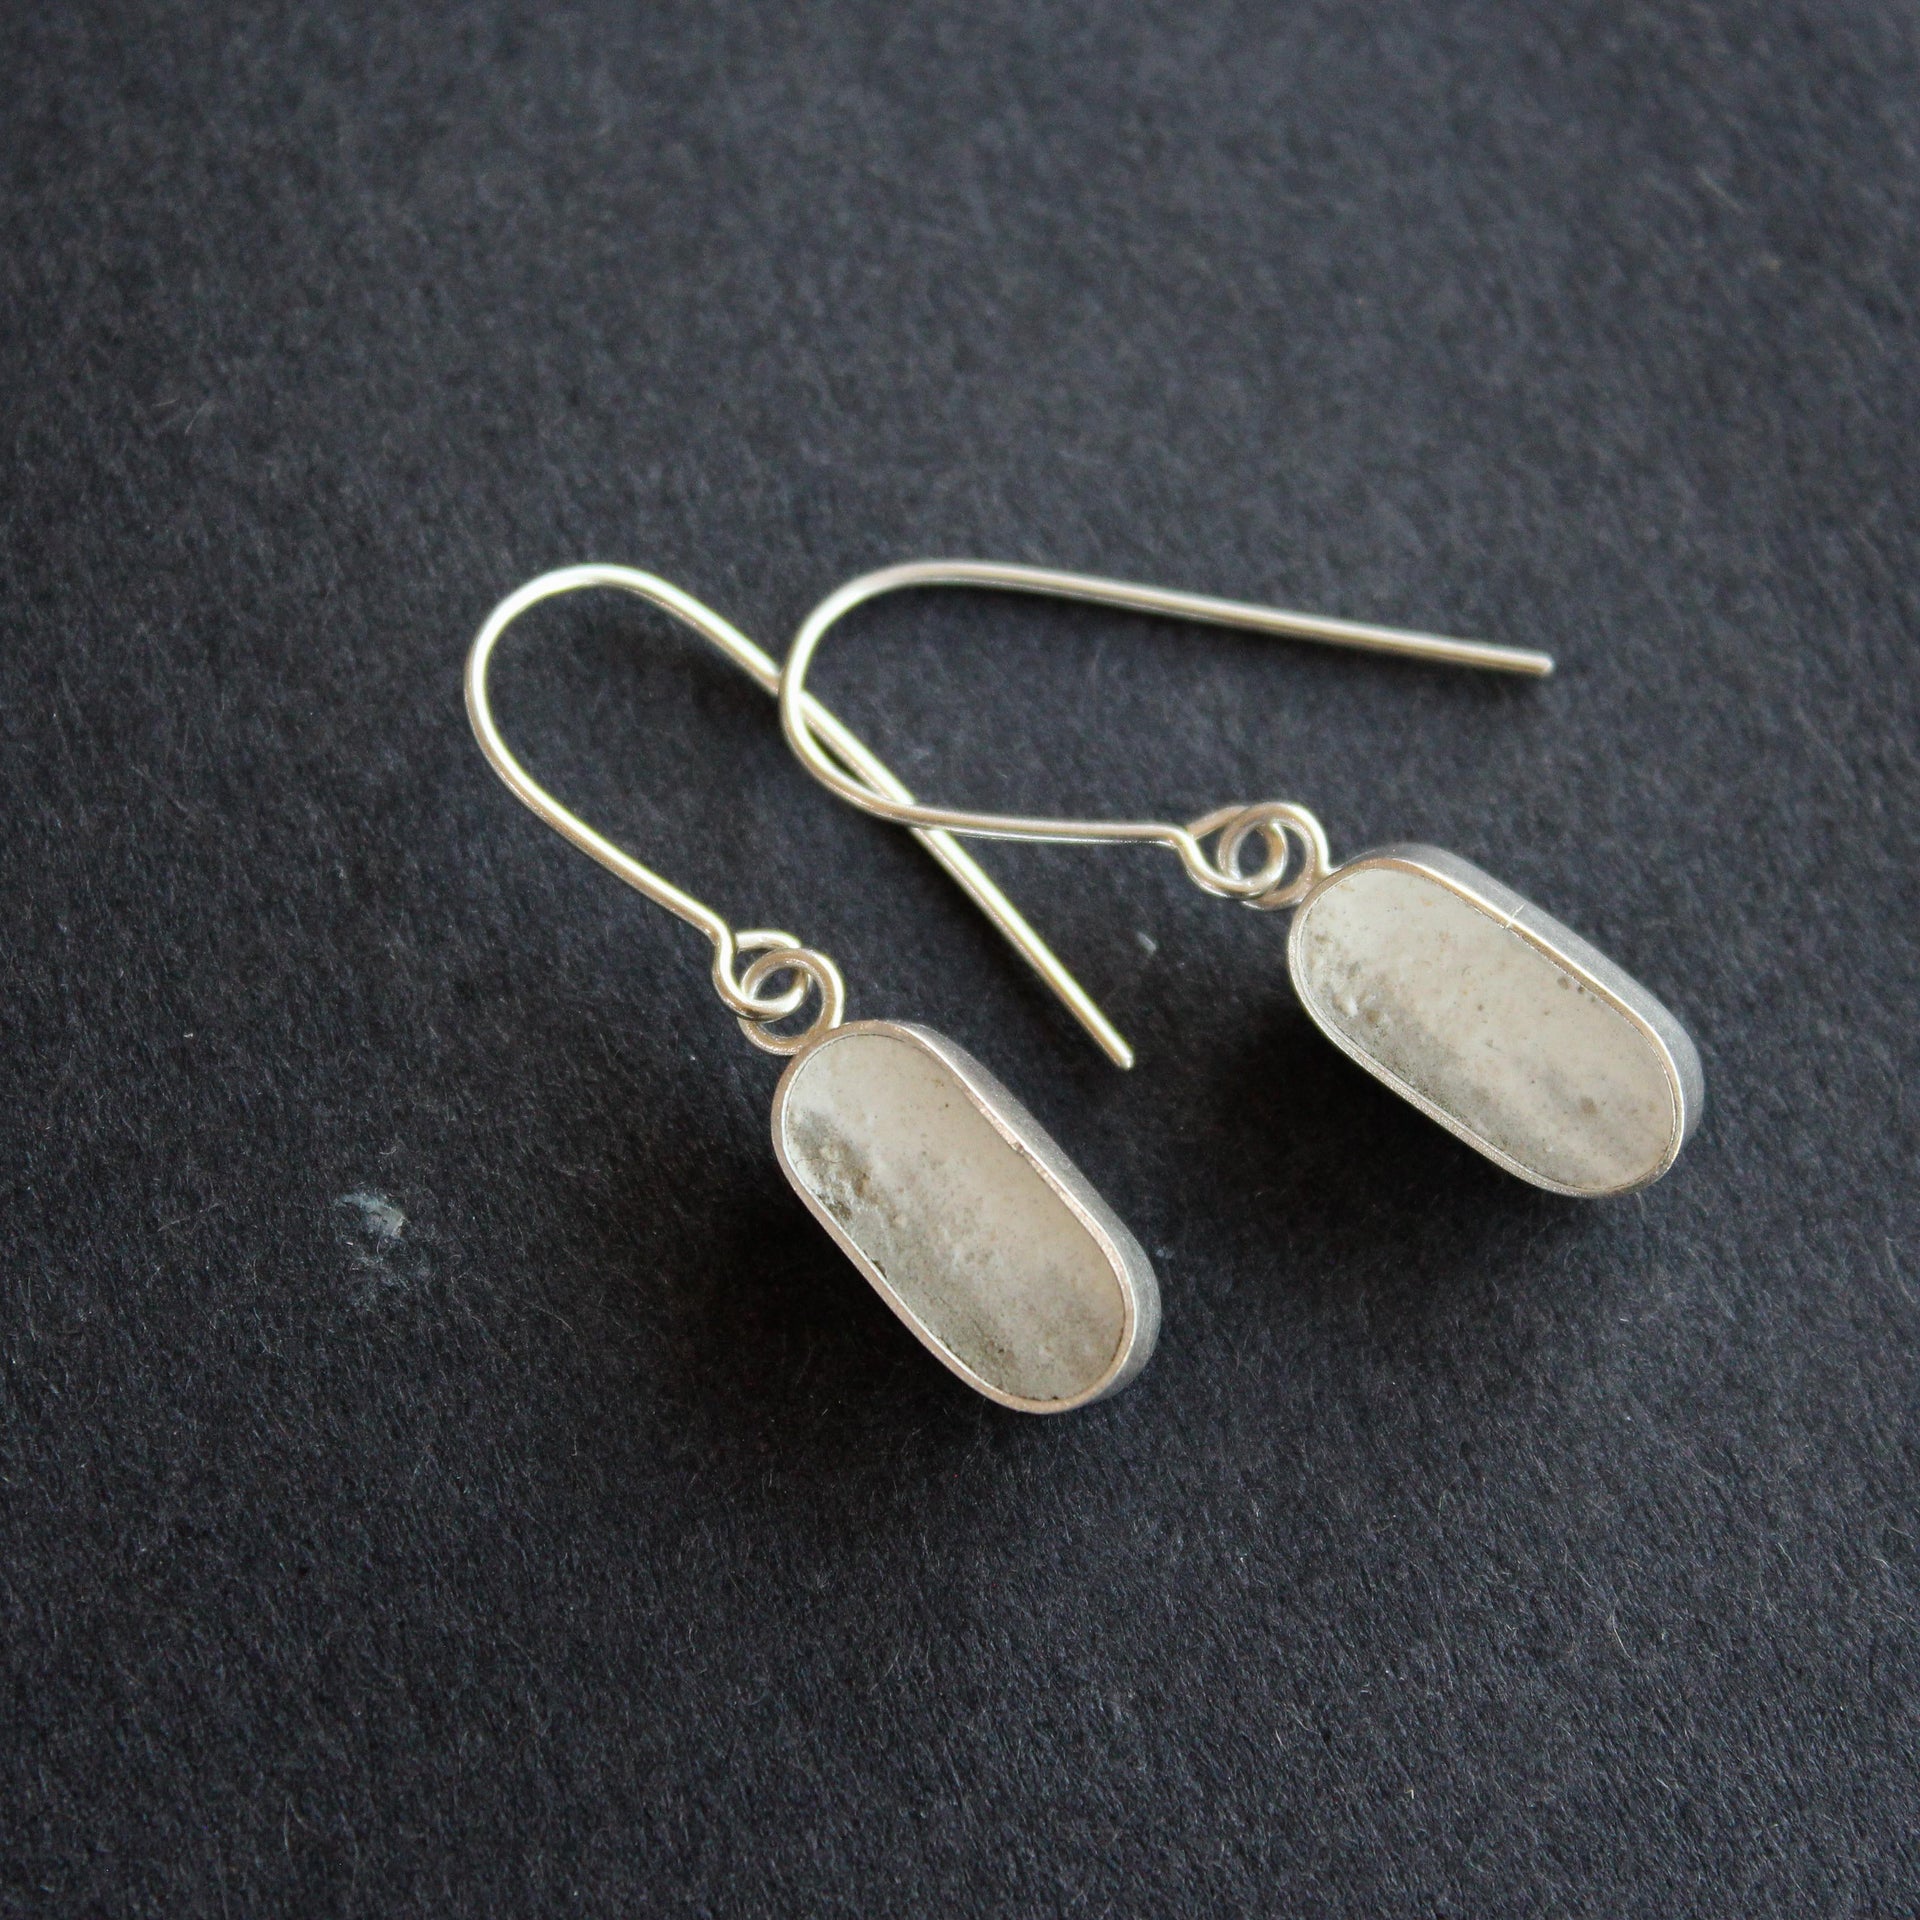 Lozenge drop earrings in silver and cement by Amy Stringer